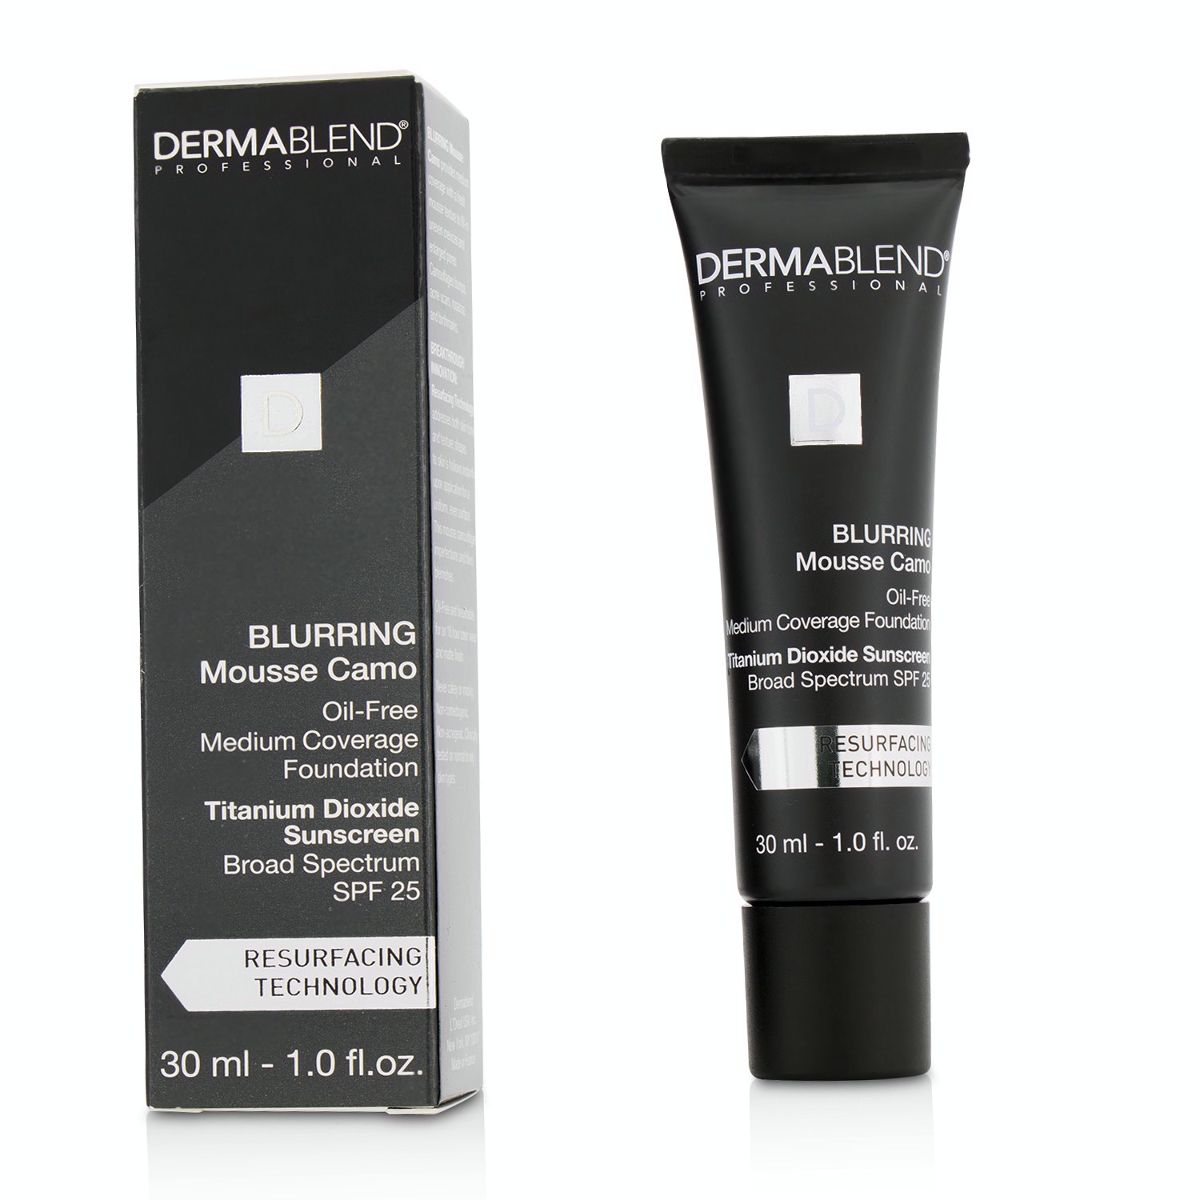 Blurring Mousee Camo Oil Free Foundation SPF 25 (Medium Coverage) - #30N Sand Dermablend Image